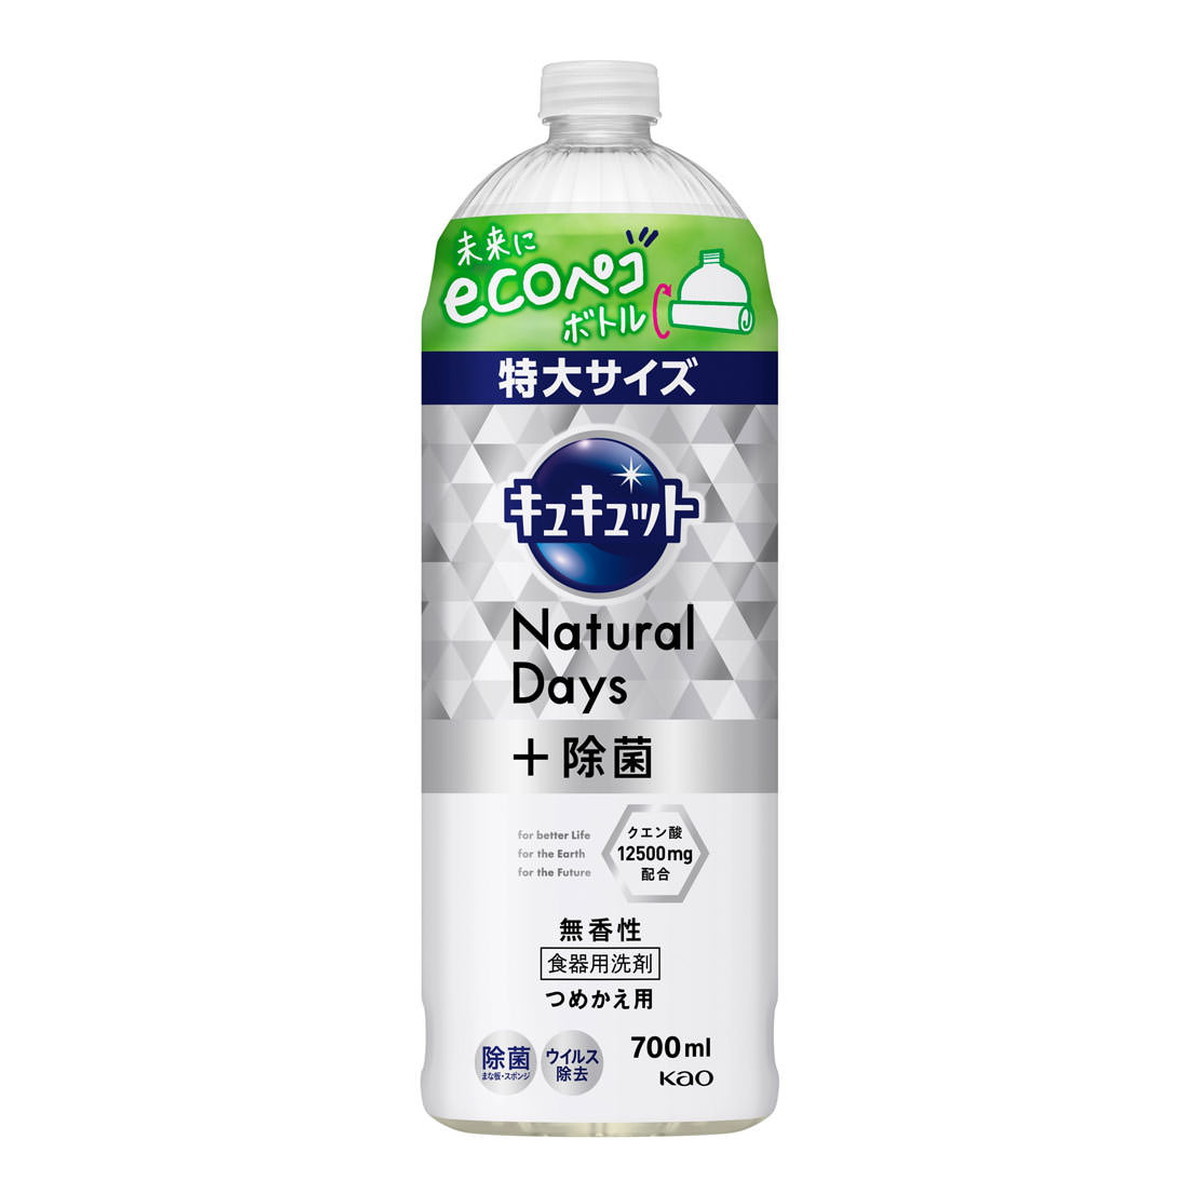 Kao キュキュット Natural Days＋除菌 無香性 詰替用 700ml ×5 キュキュット 台所用洗剤の商品画像